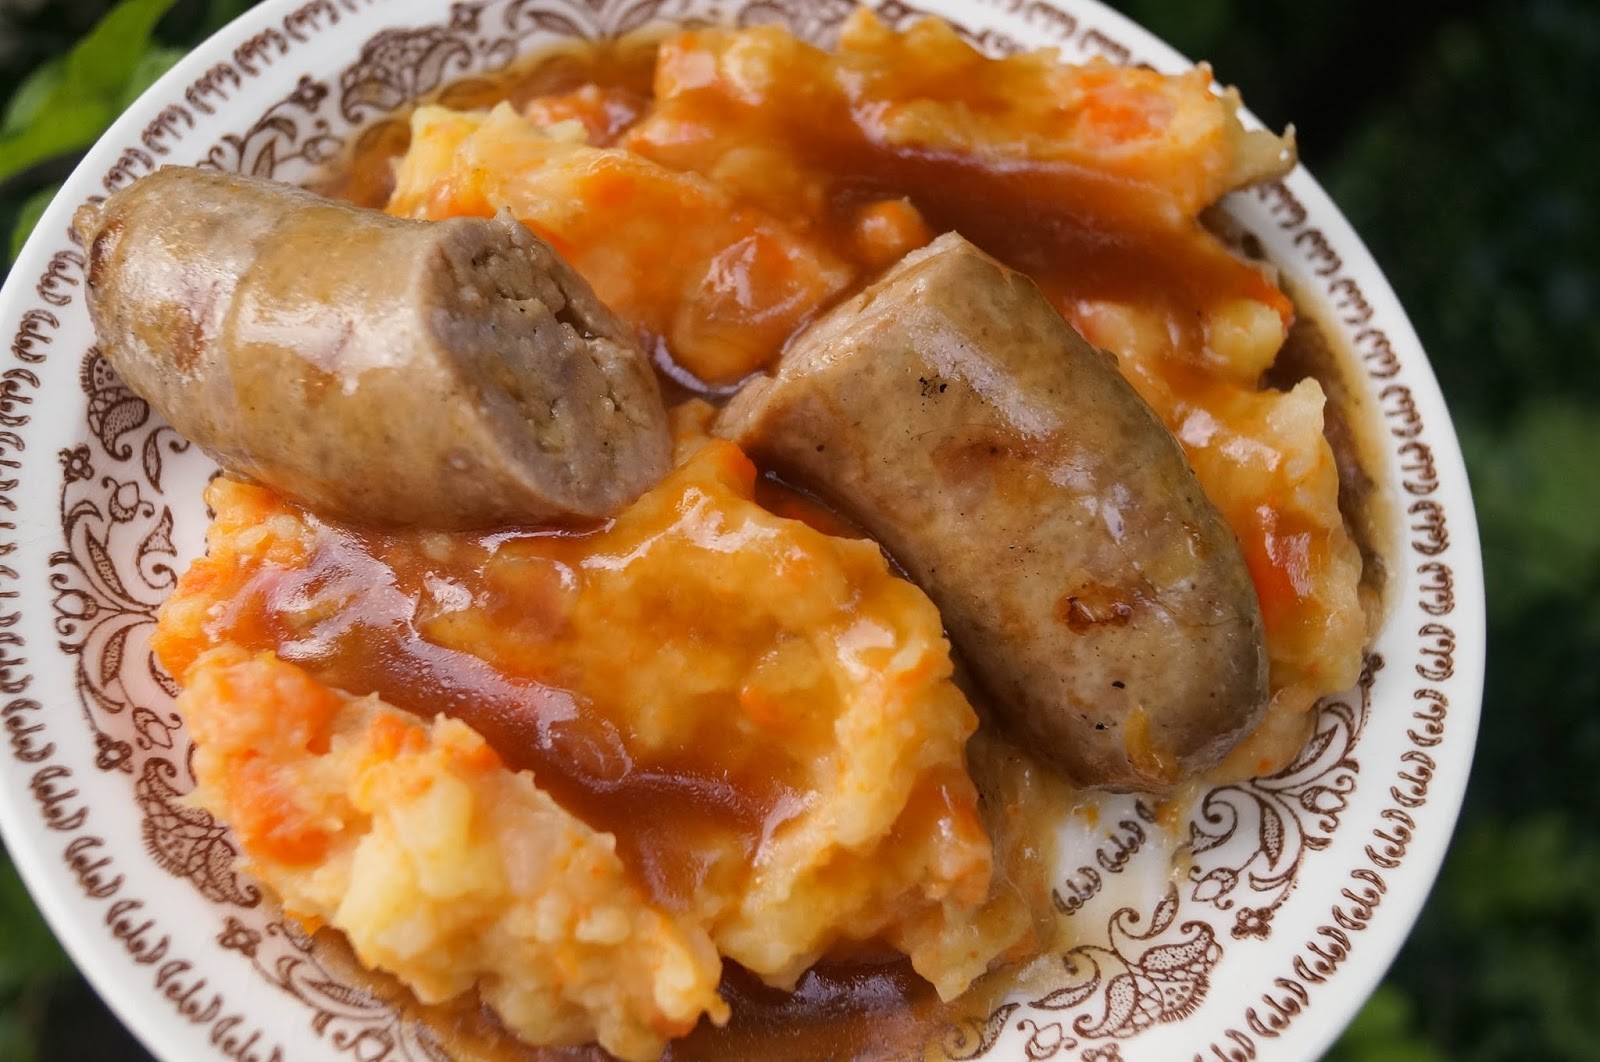 In the Kitchen with Jenny: Hutspot met Wurst en Jus (Hotchpotch with Wurst  and Gravy)